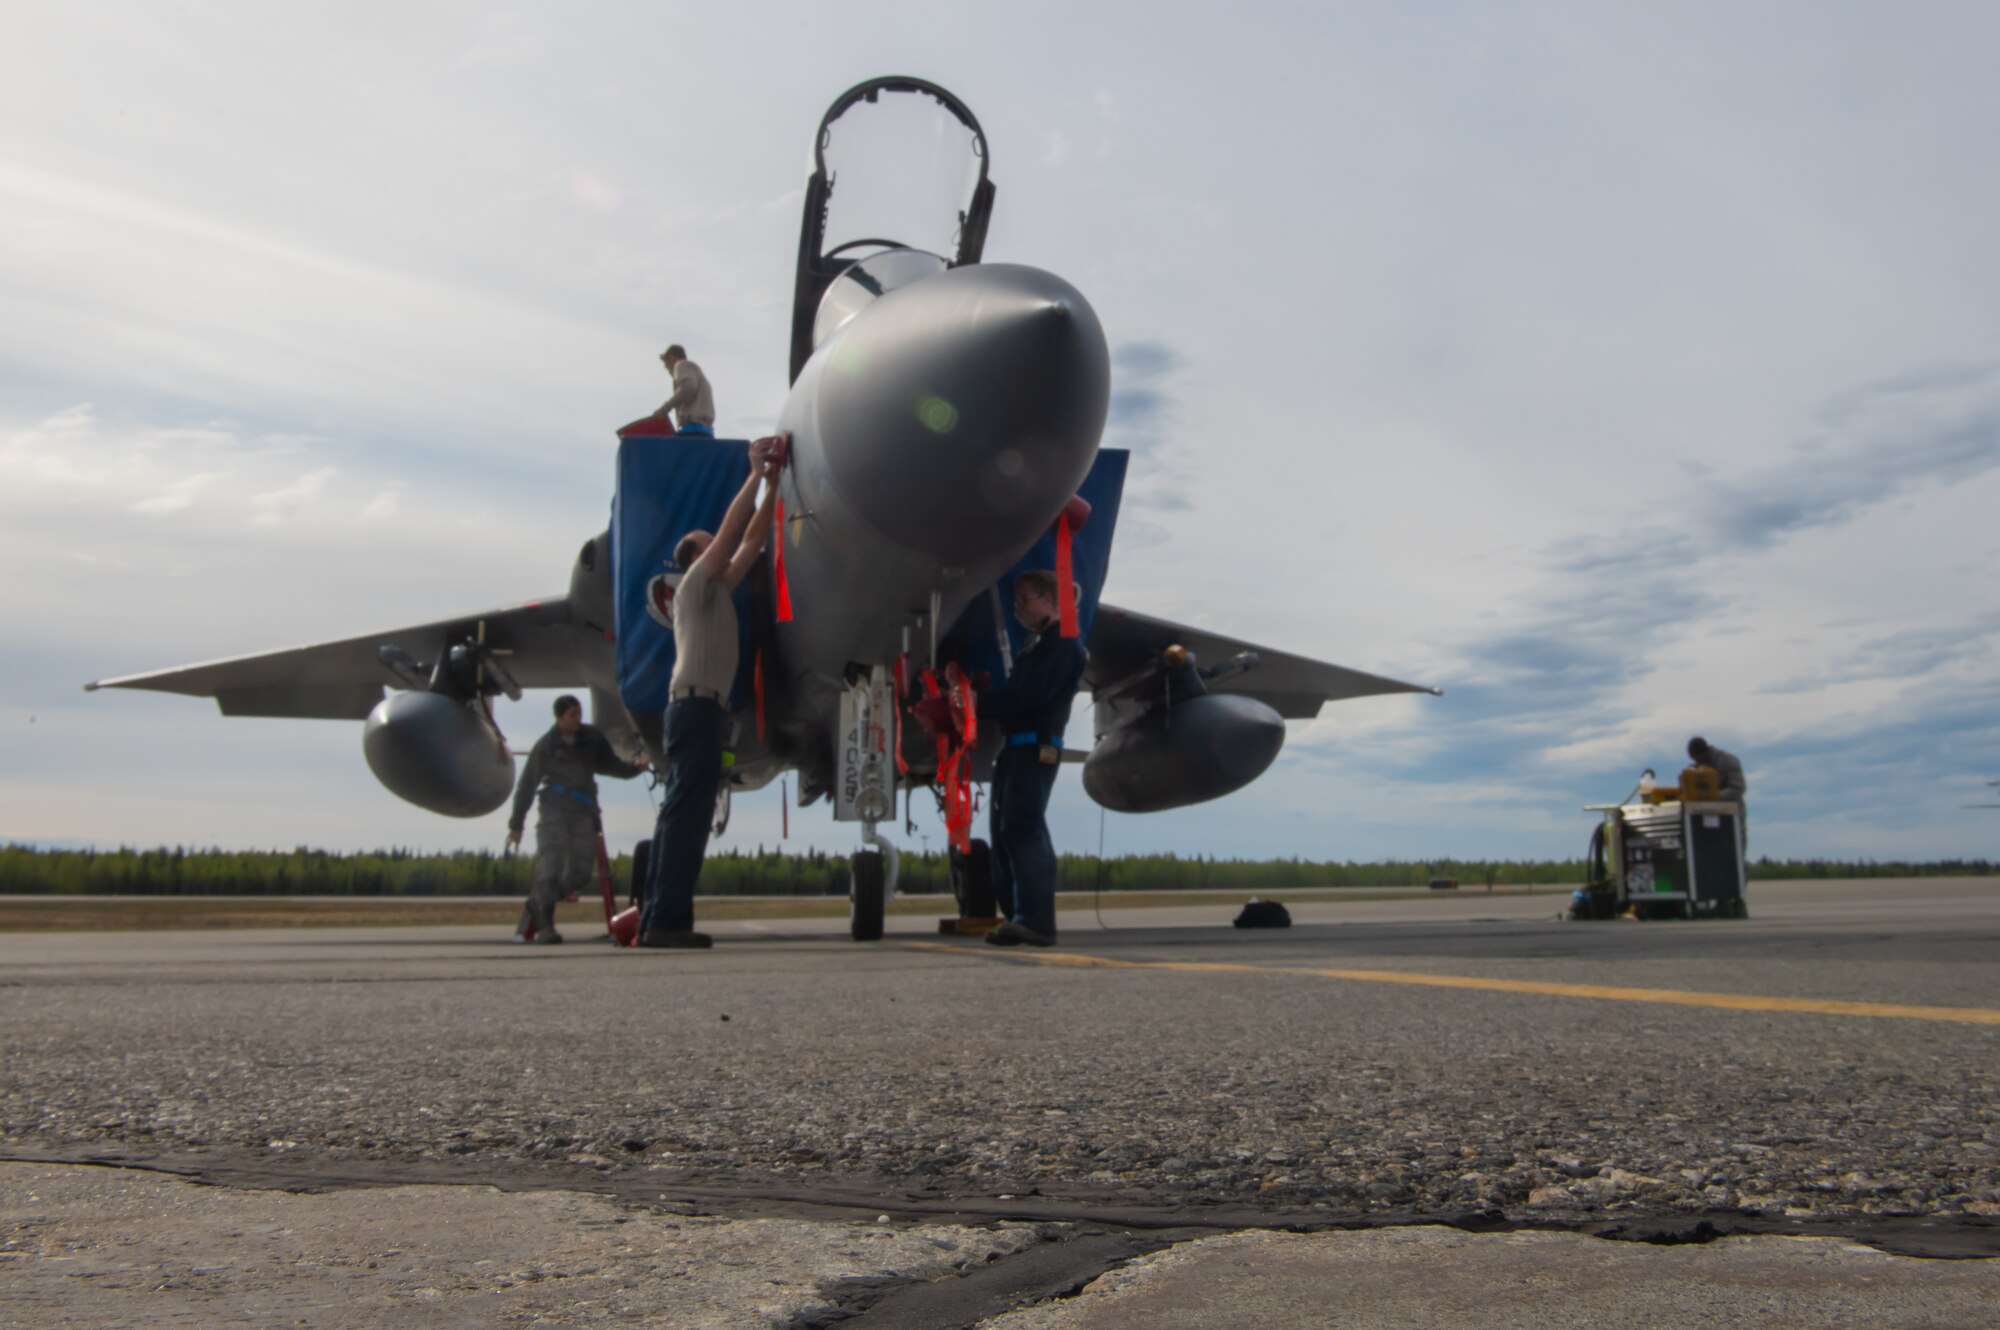 U.S. Air Force Airmen from the 44th Aircraft Maintenance Squadron conduct a post flight check on an F-15C Eagle assigned to the 44th Fighter Squadron from Kadena Air Base, Japan, during exercise Northern Edge (NE19), May 14, 2019, at Eielson Air Force Base, Alaska.